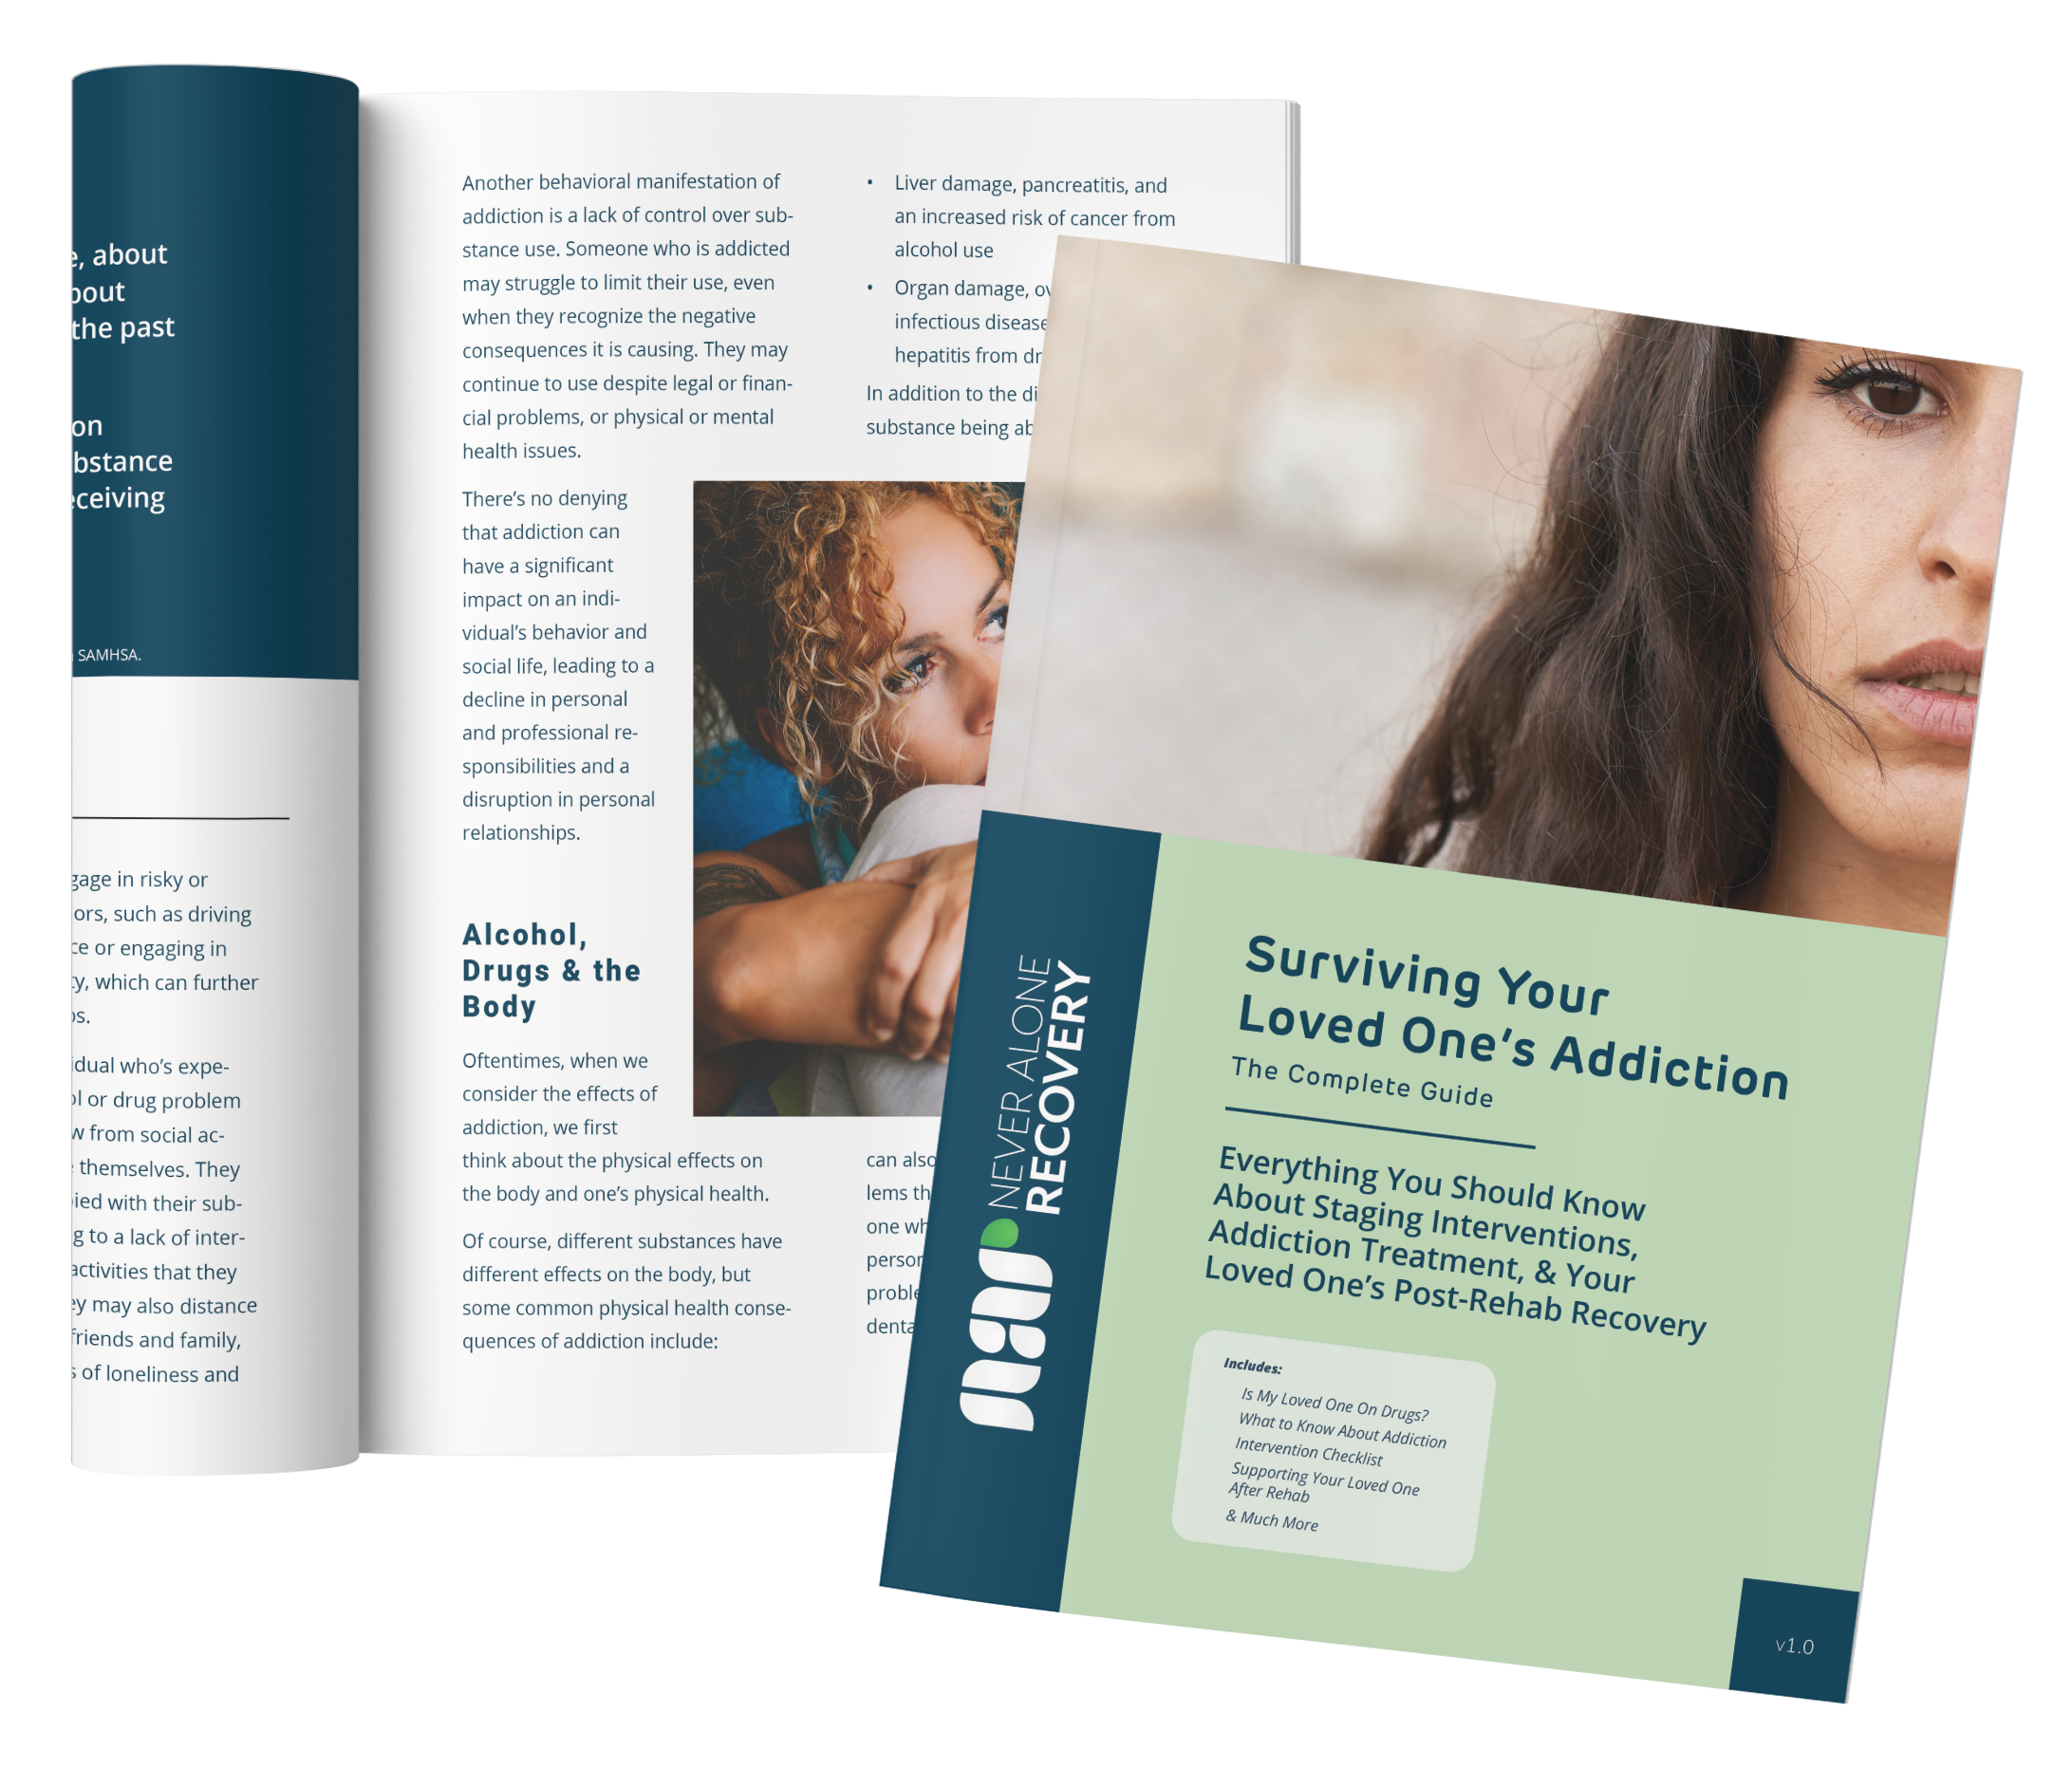 Surviving Addiction eBook, cover and inside spread